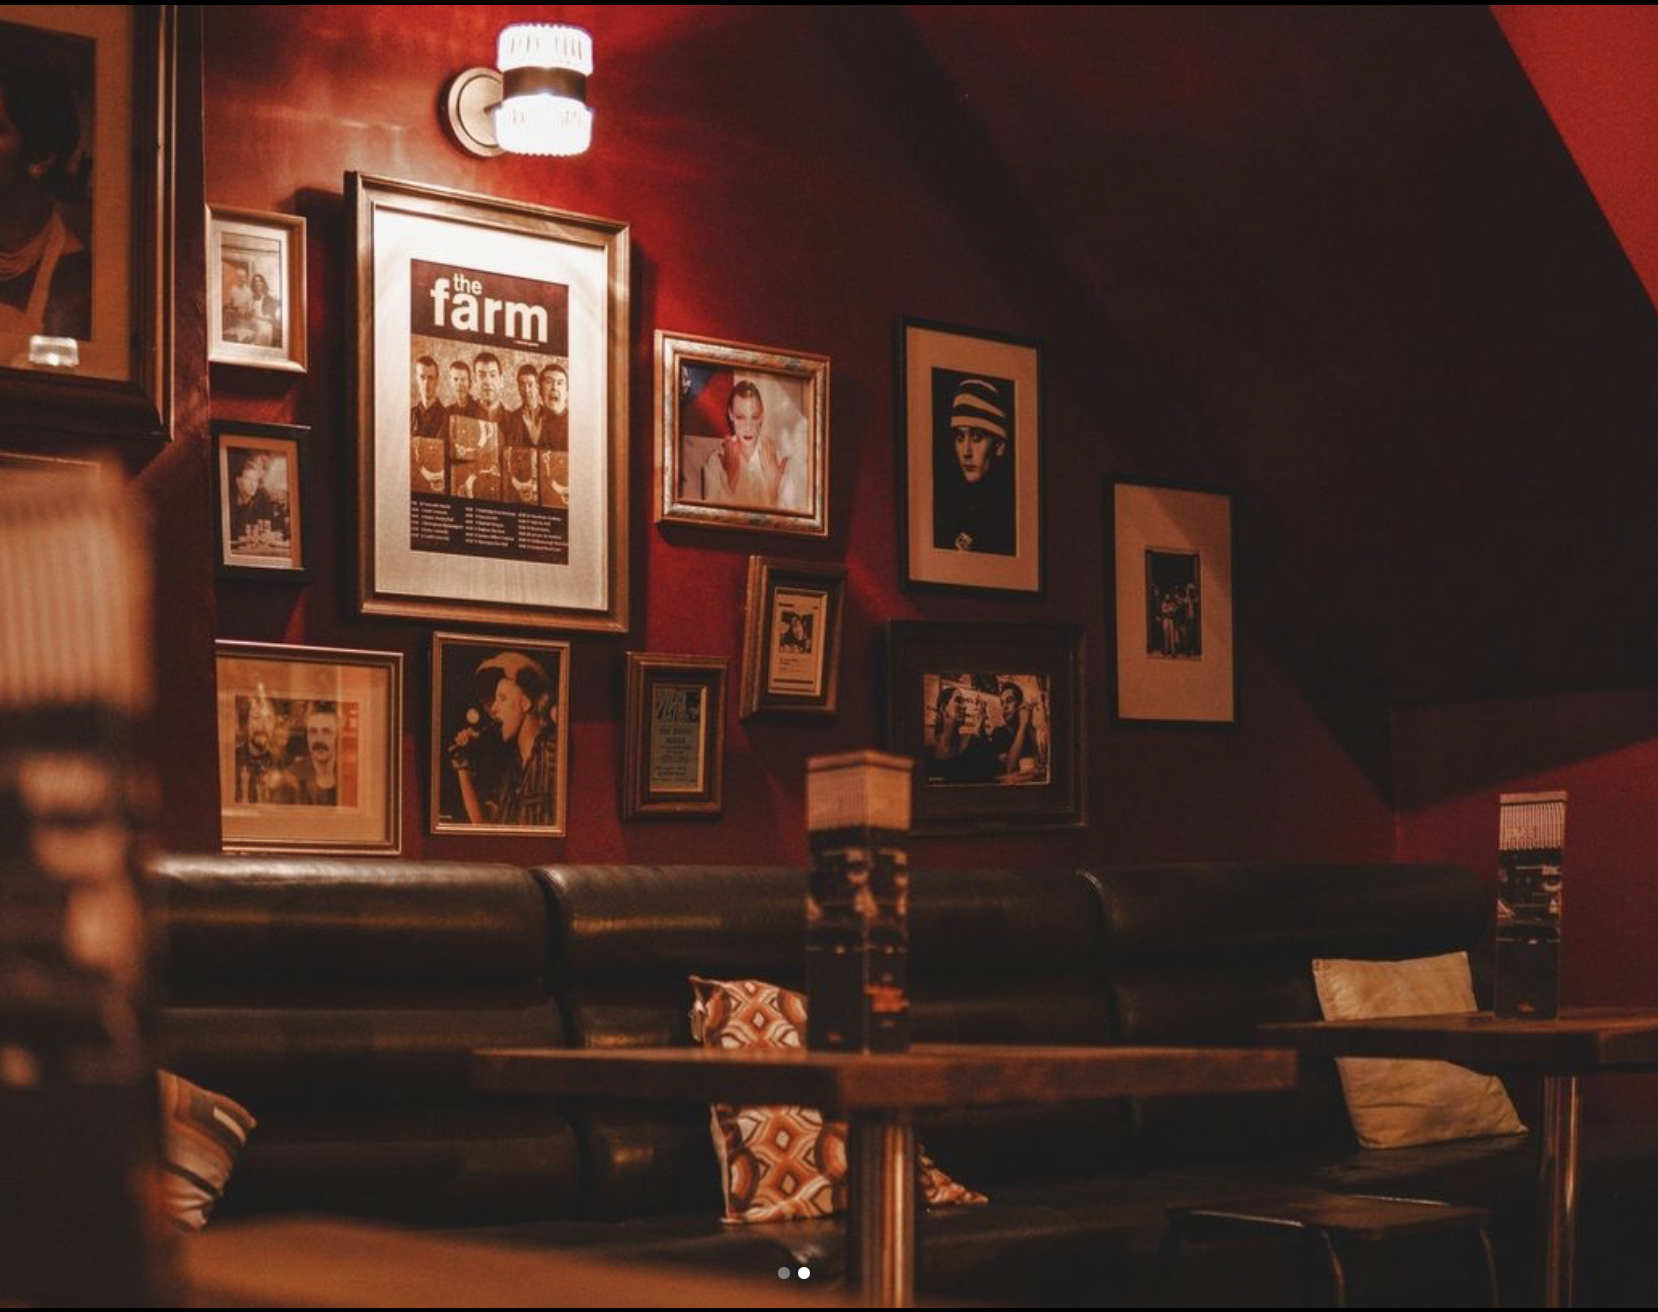 The first memory walls at Cafe Tabac